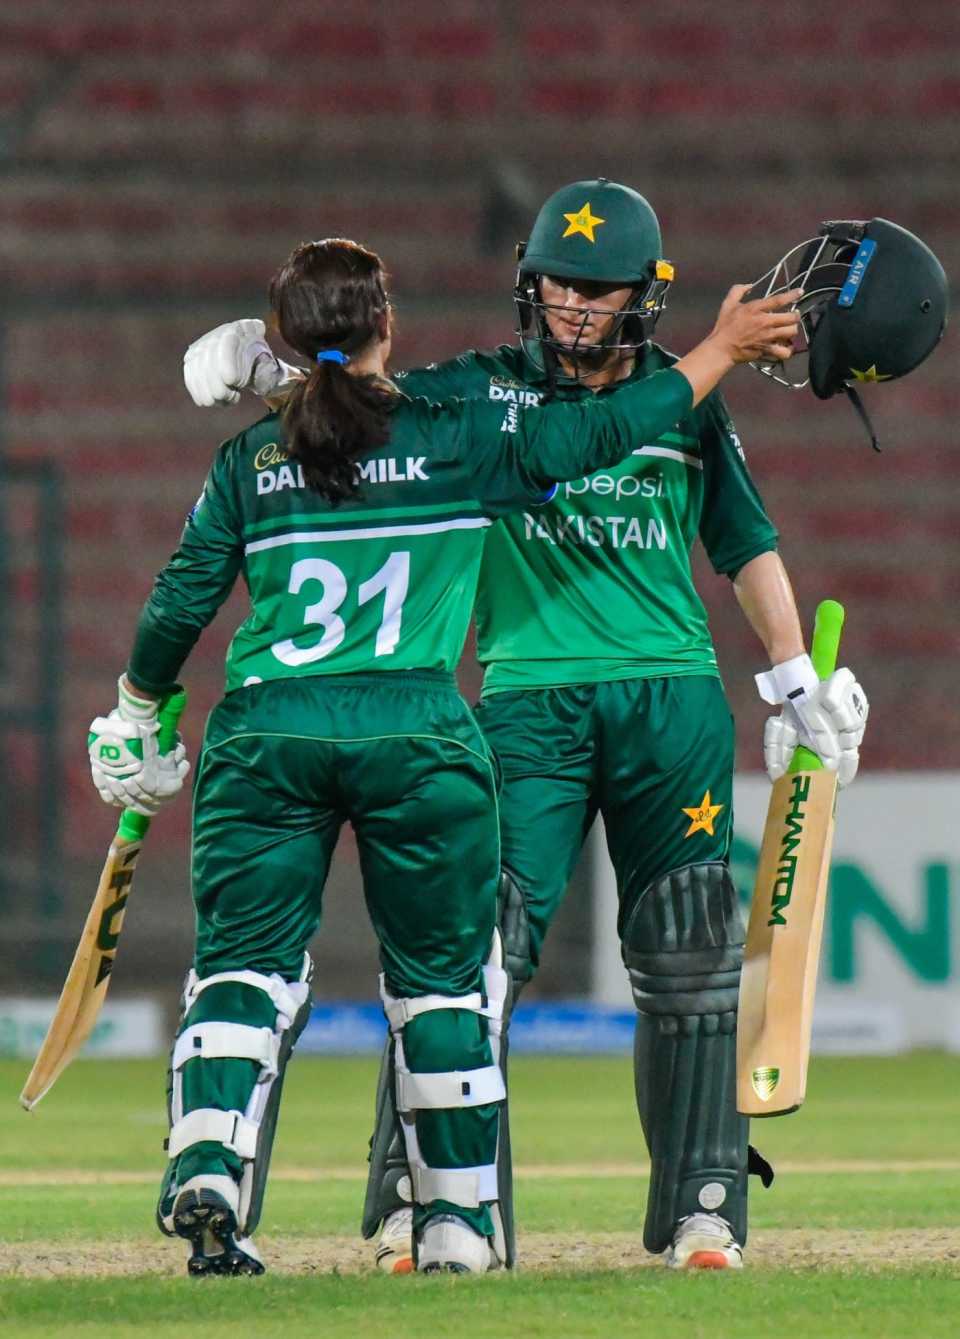 Sidra Ameen and Bismah Maroof added 110 for the second wicket